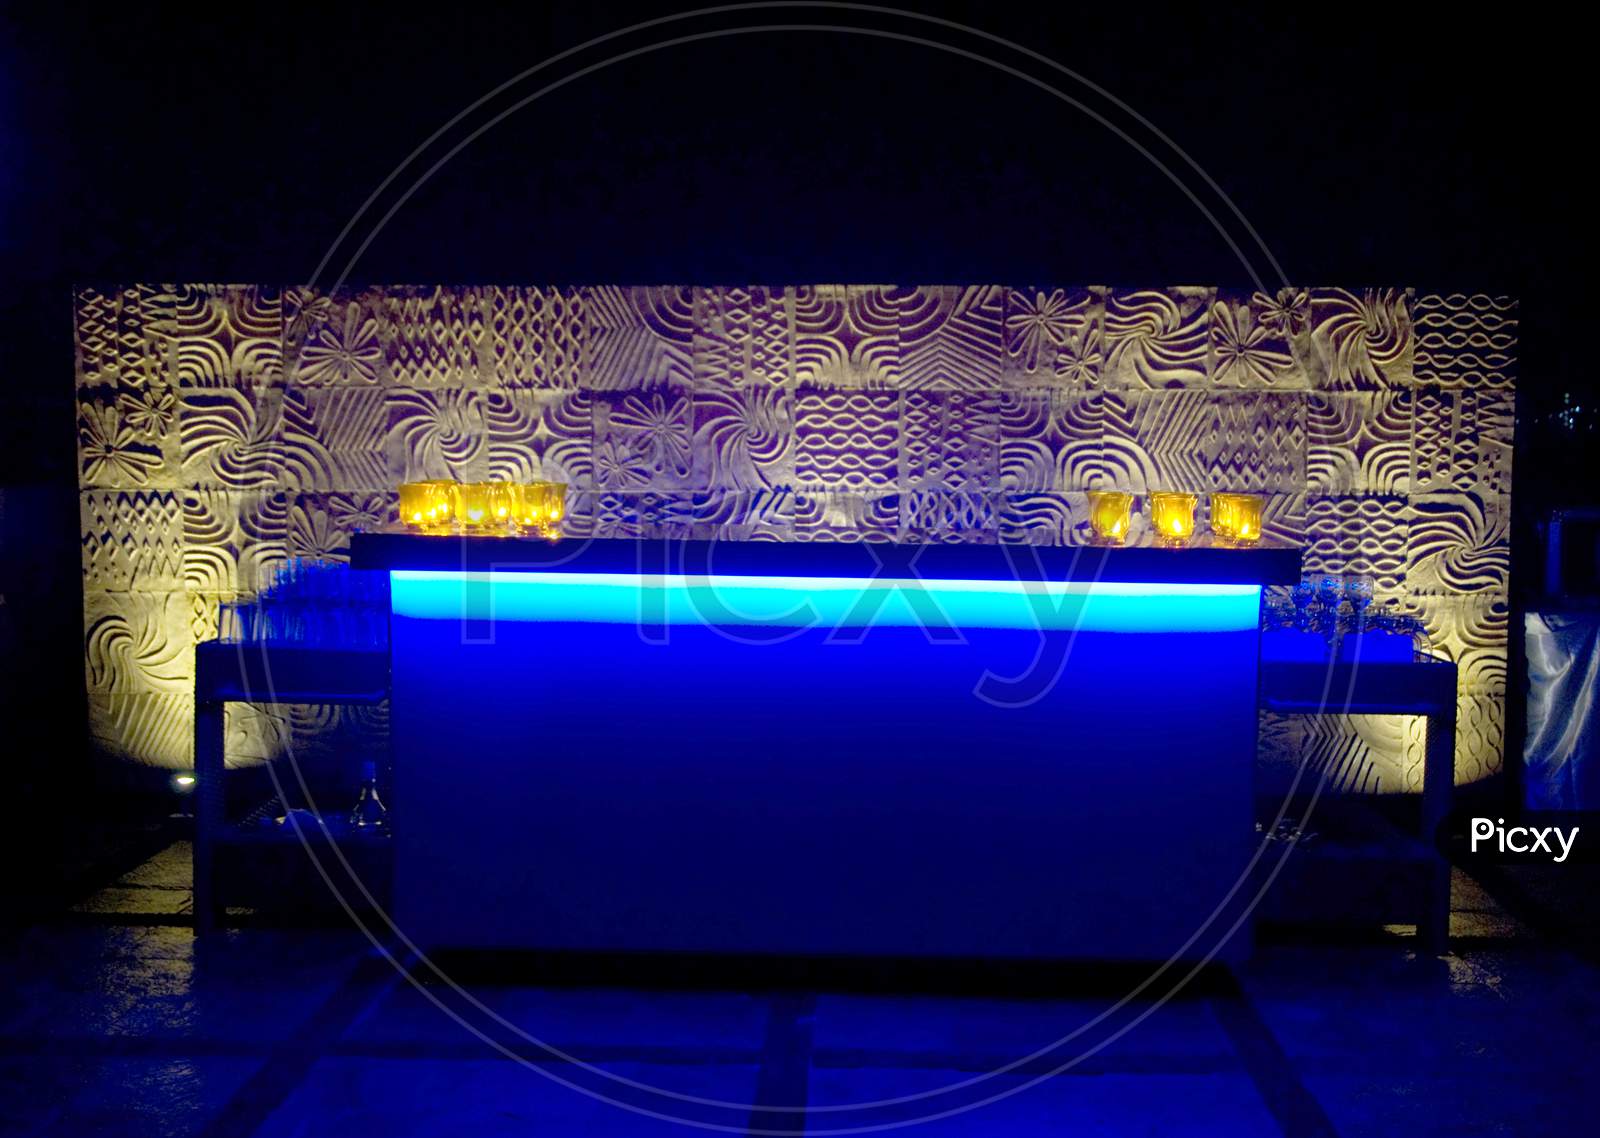 Bar Counter In a House Compound With Night Lights